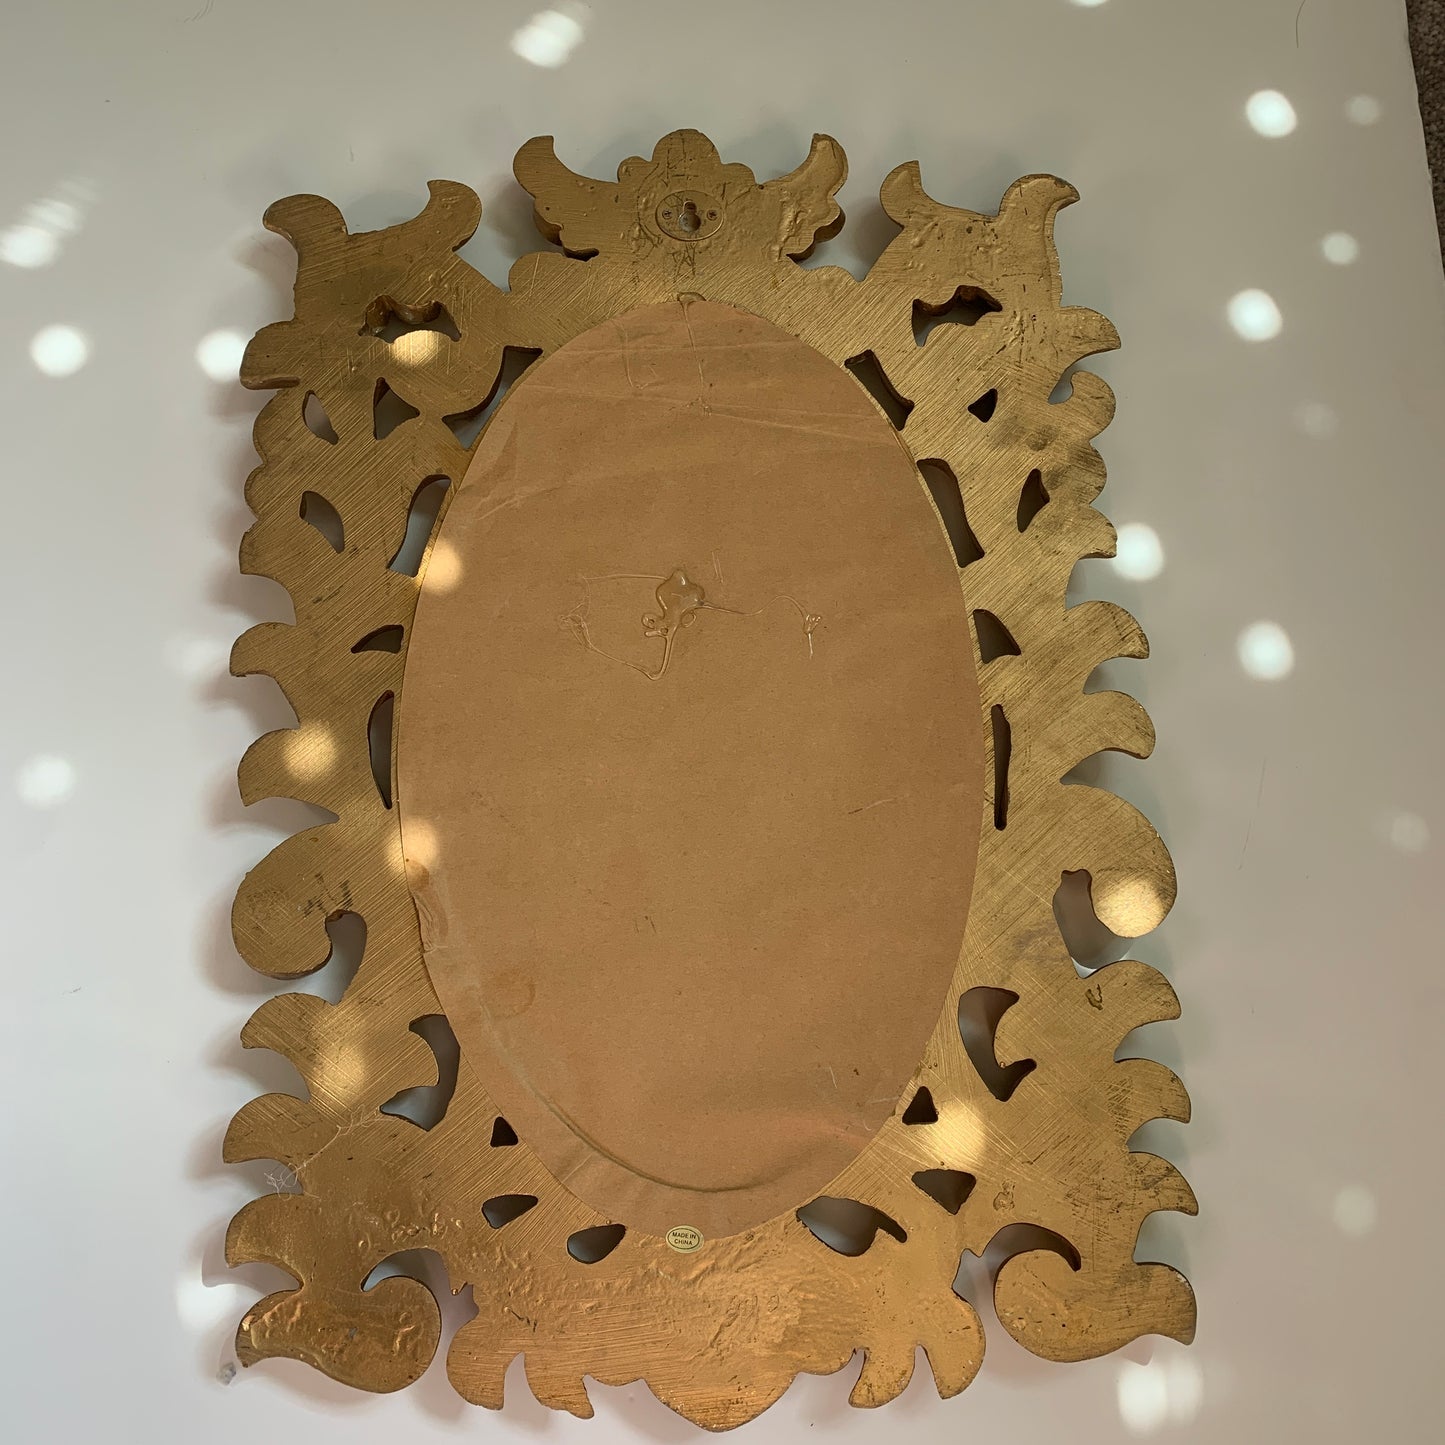 Antique Gold Finish Distressed Oval Mirror